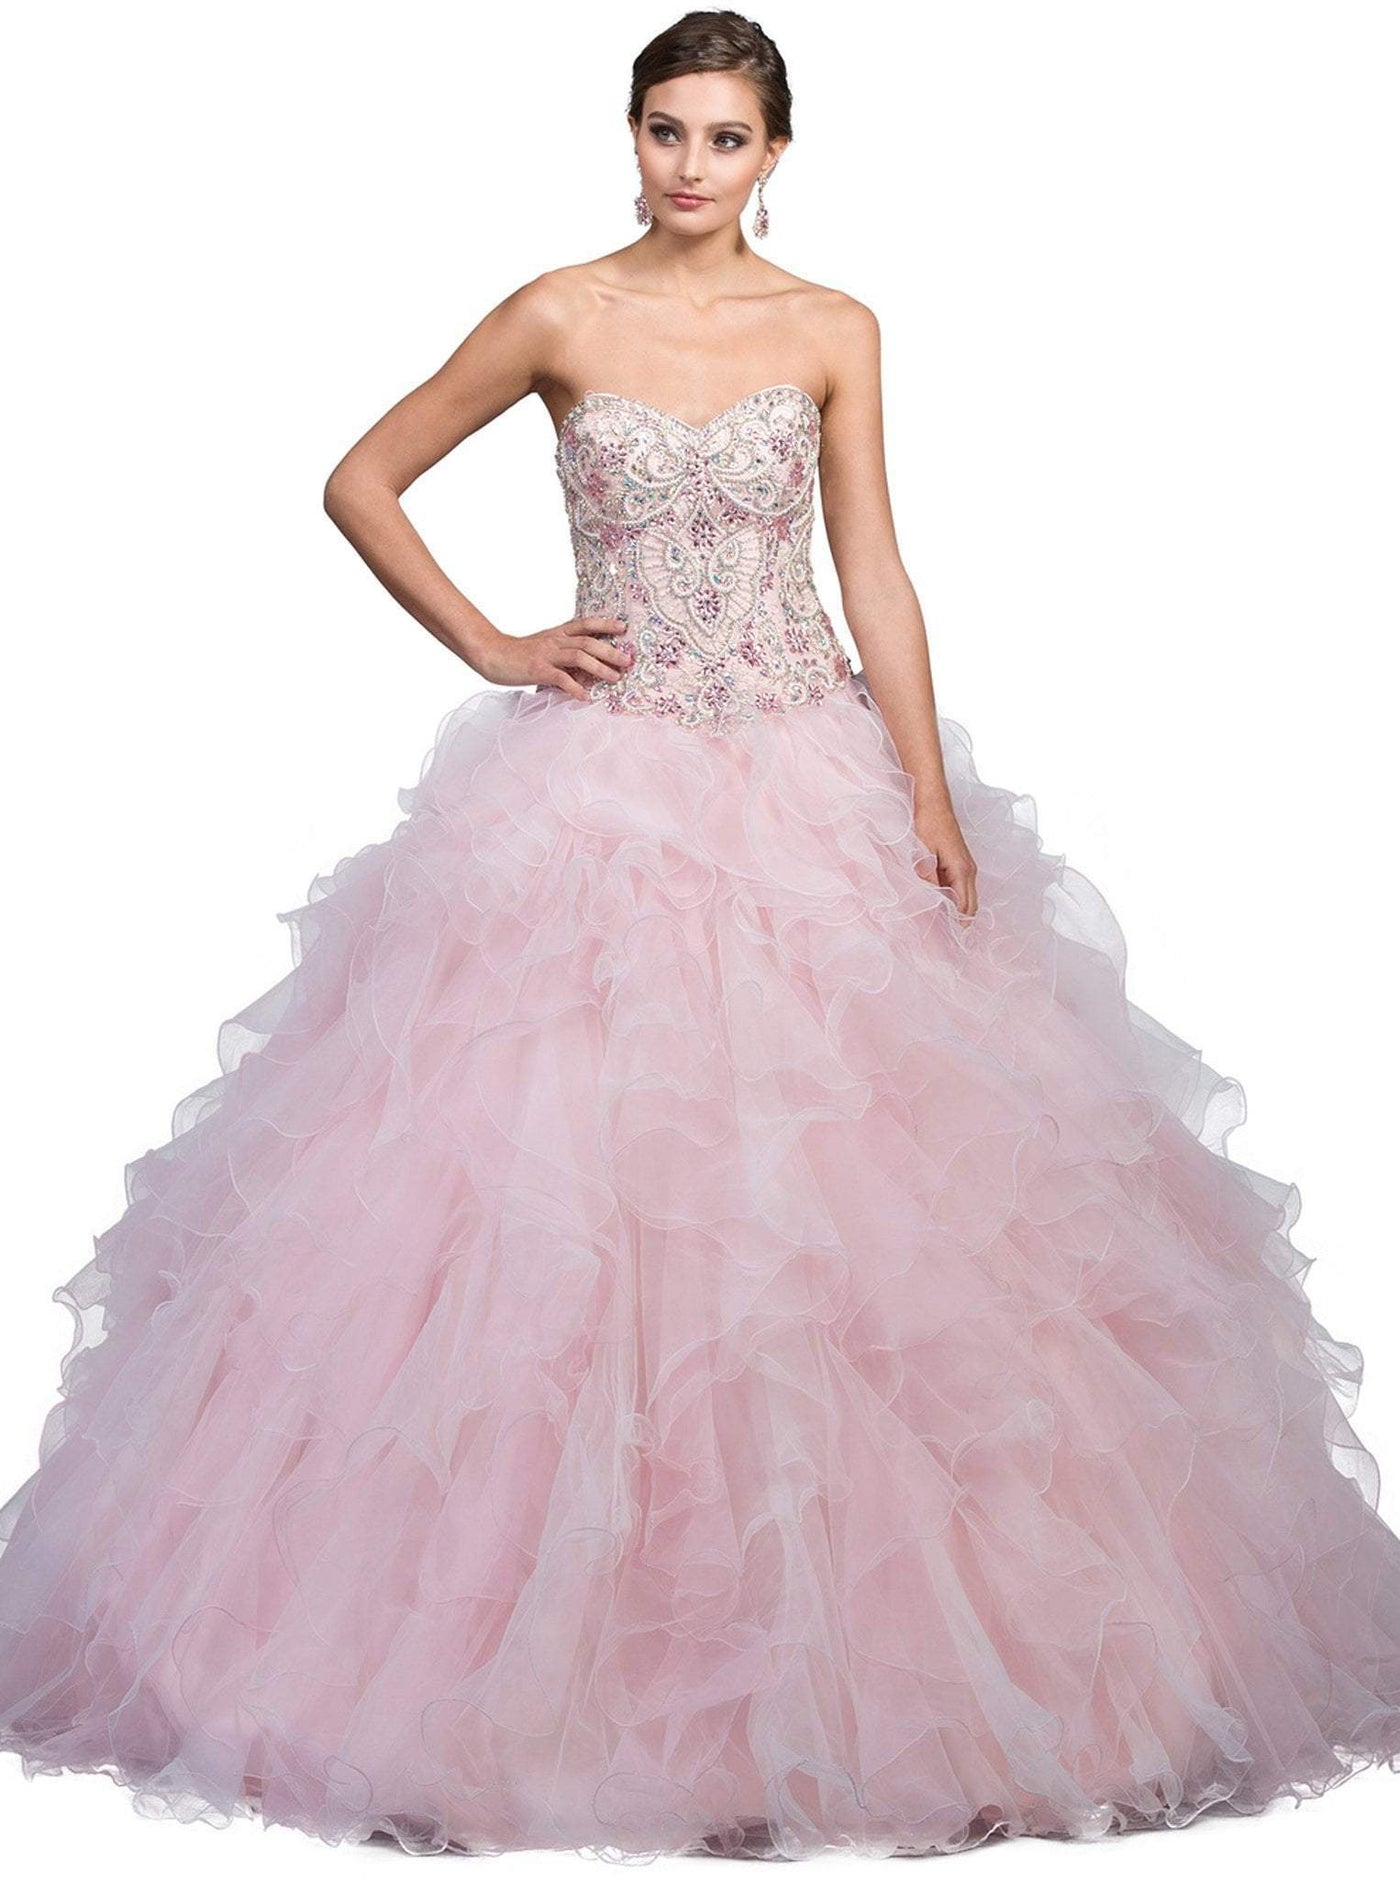 Dancing Queen - 1210 Strapless Jeweled Sweetheart Ruffled Quinceanera Ballgown Special Occasion Dress XS / Blush